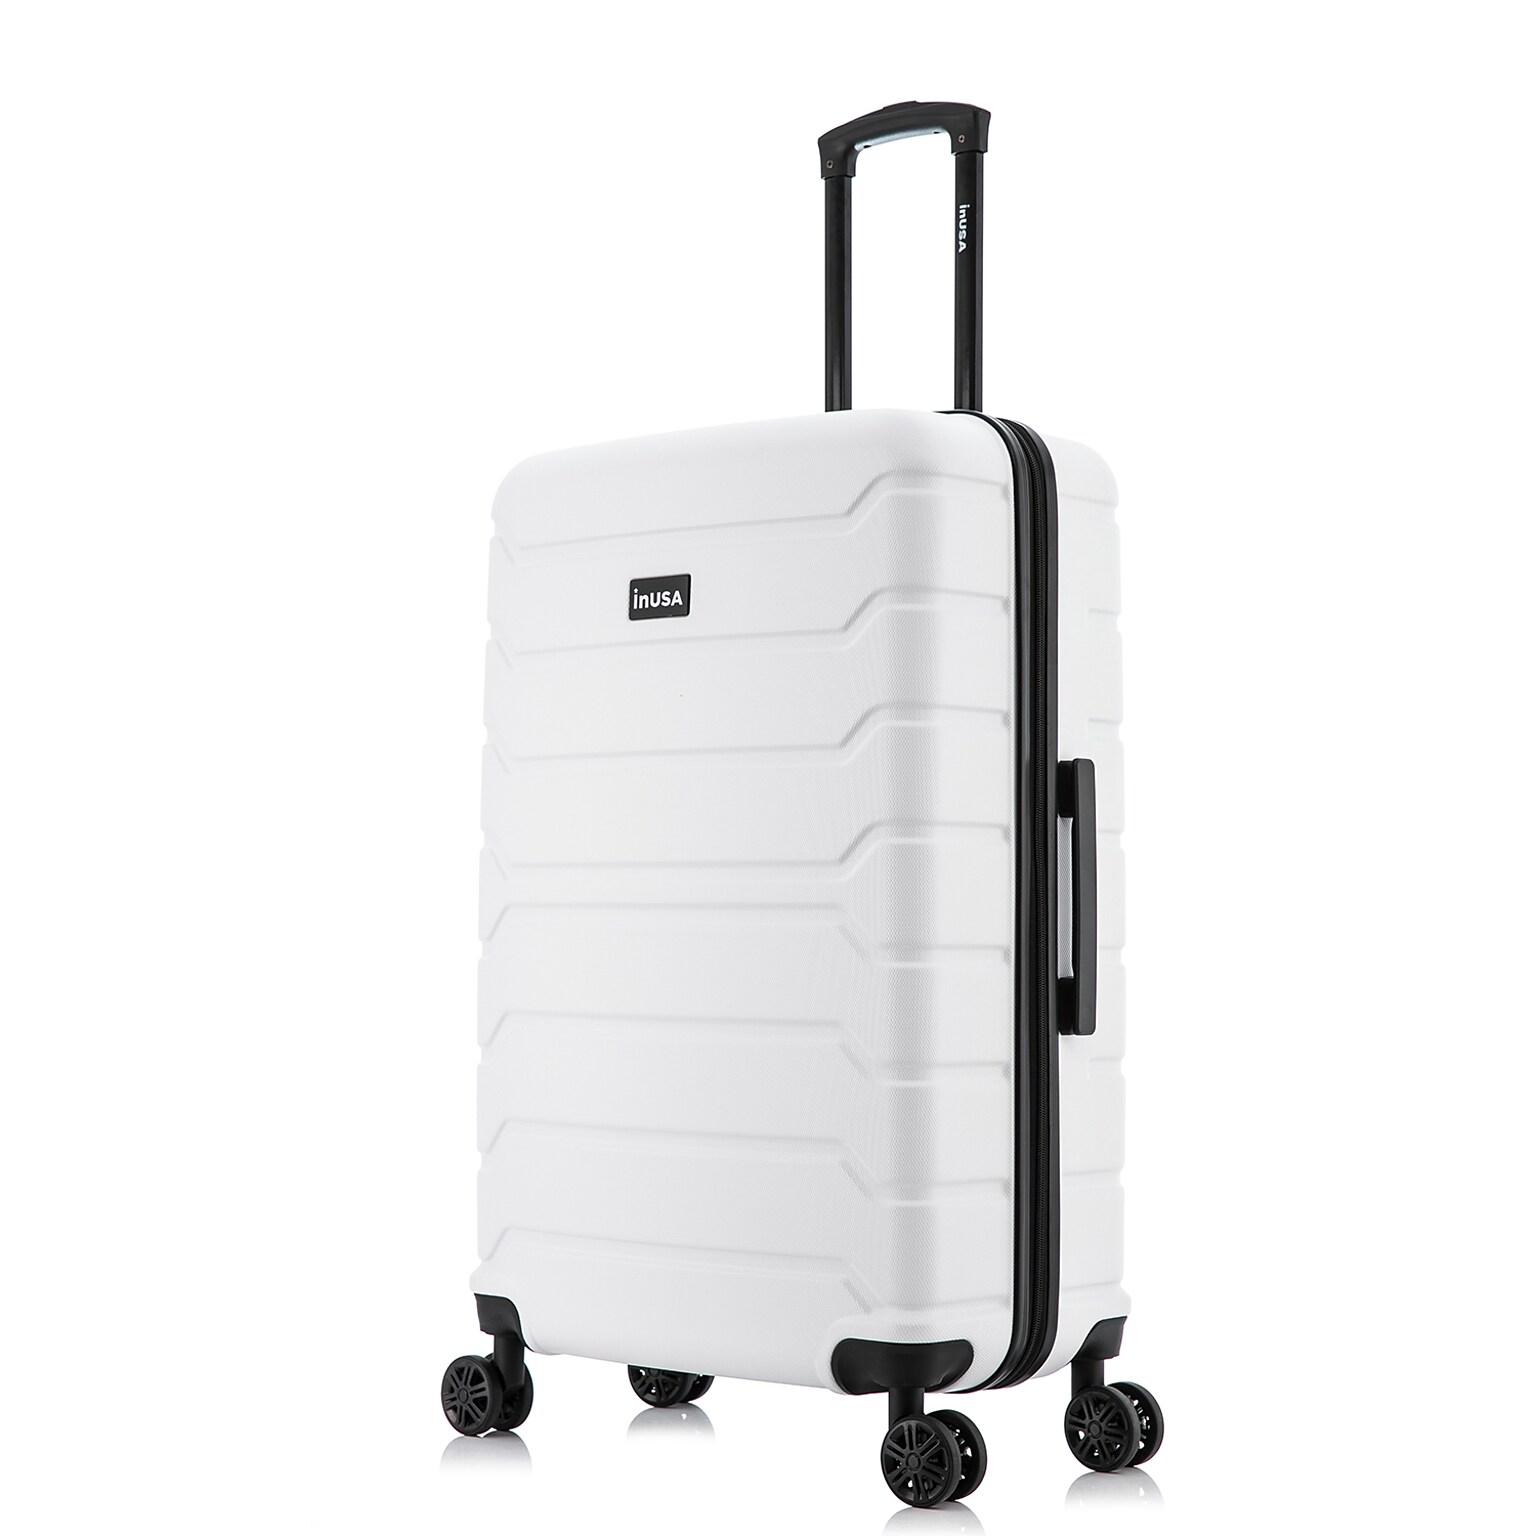 InUSA Trend 29.17 Hardside Suitcase, 4-Wheeled Spinner, White (IUTRE00L-WHI)